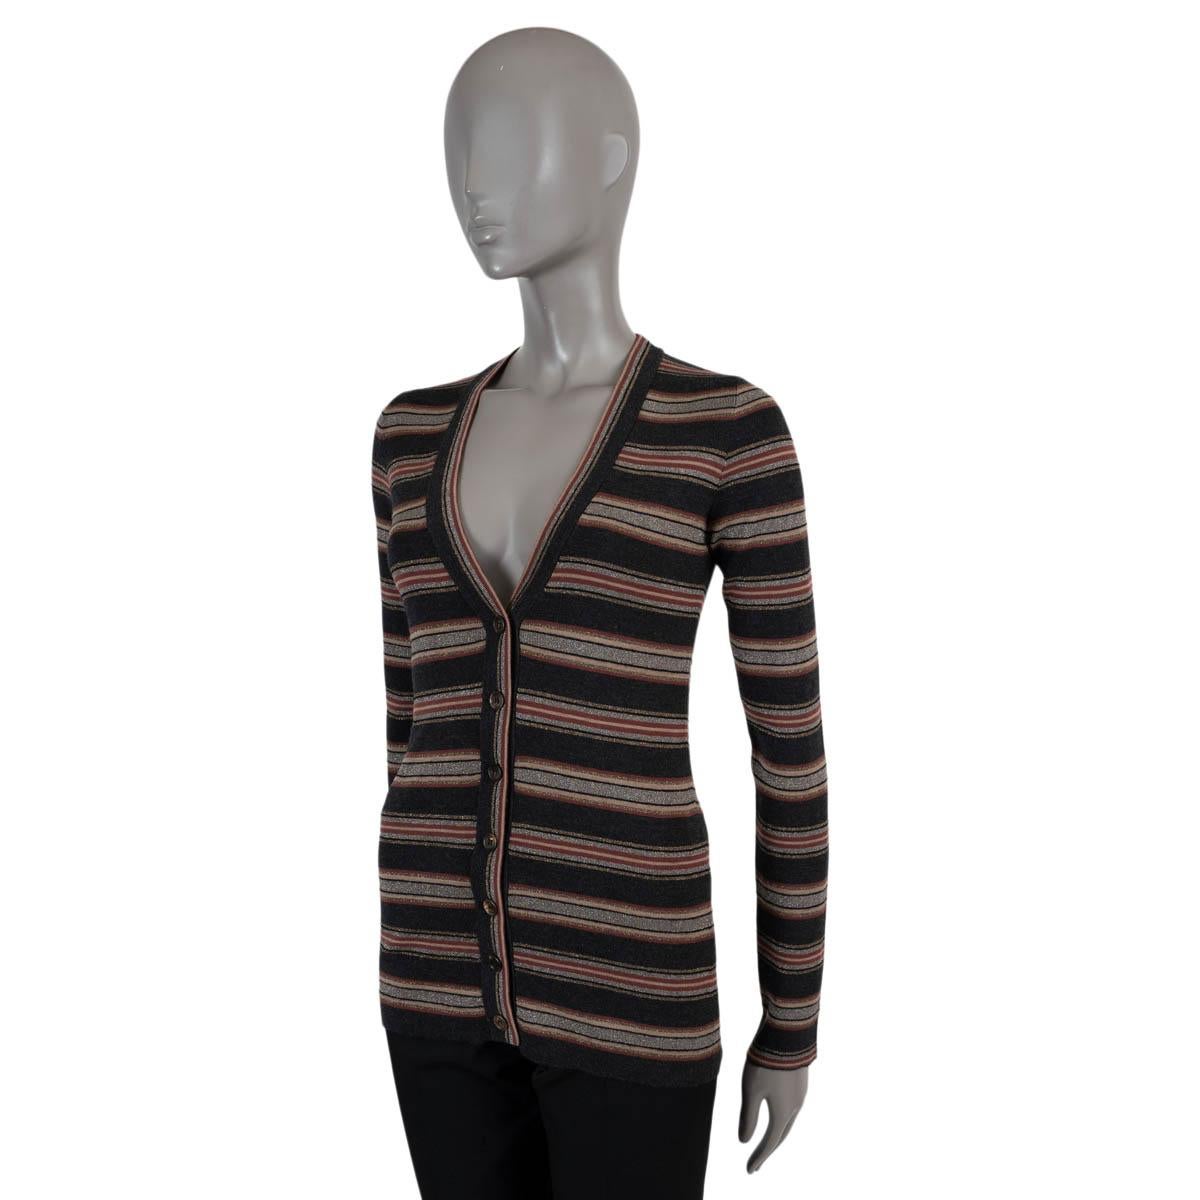 100% authentic Brunello Cucinelli lurex striped cardigan in anthracite, red, gold and silver wool (90%) and cashmere (10%). Features slim-fit, long silhouette, V-neck with knit trim. Closes with buttons on the front. Has been worn and is in